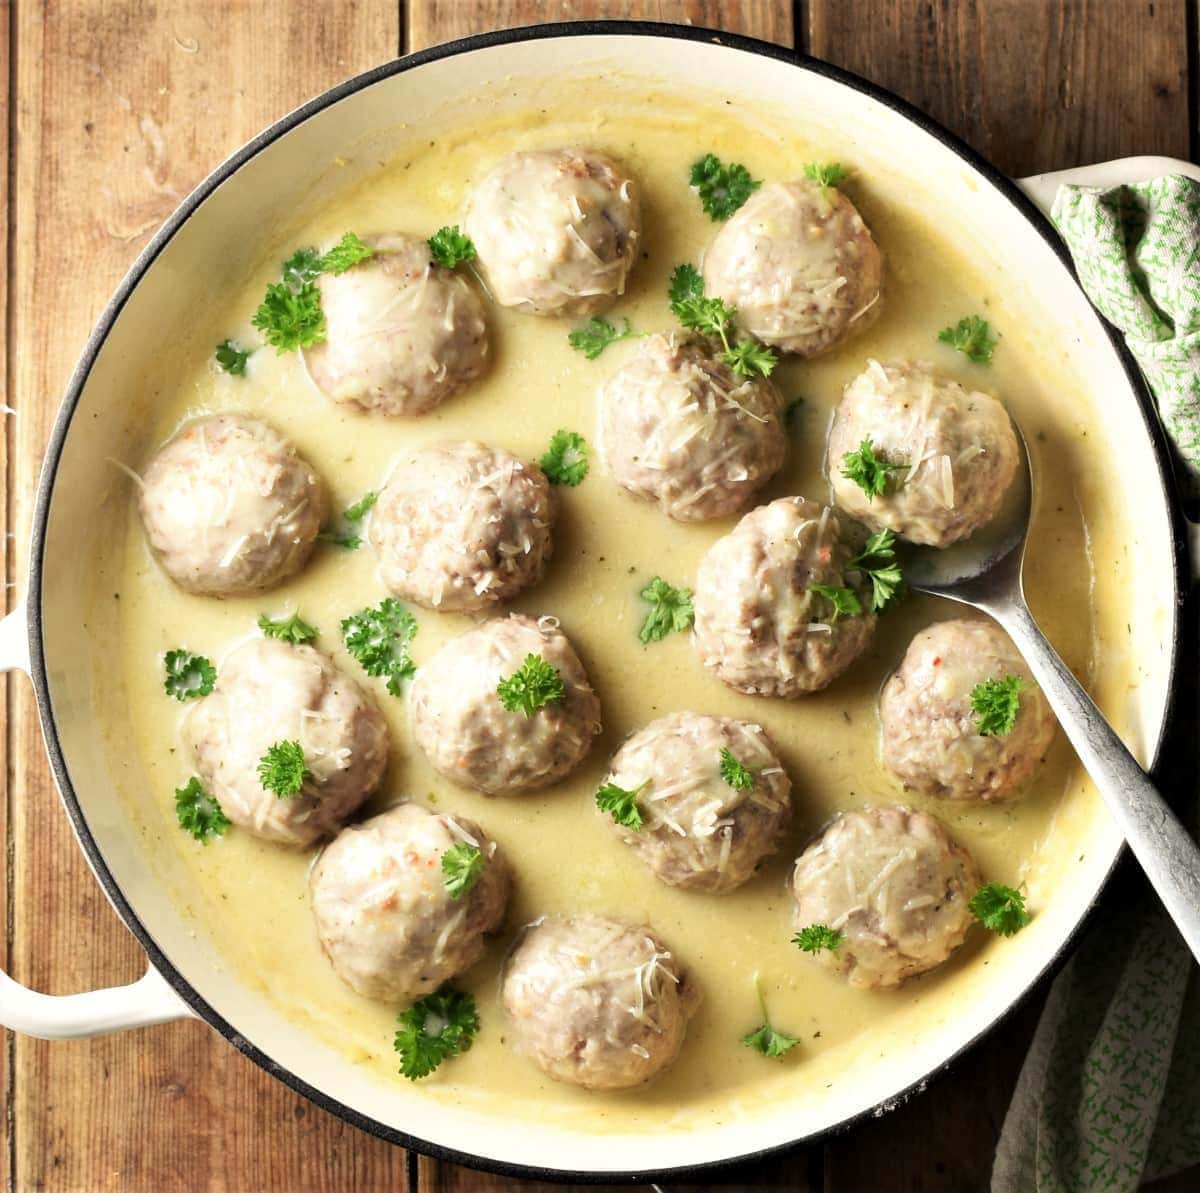 Meatballs in white sauce with spoon in large shallow dish.